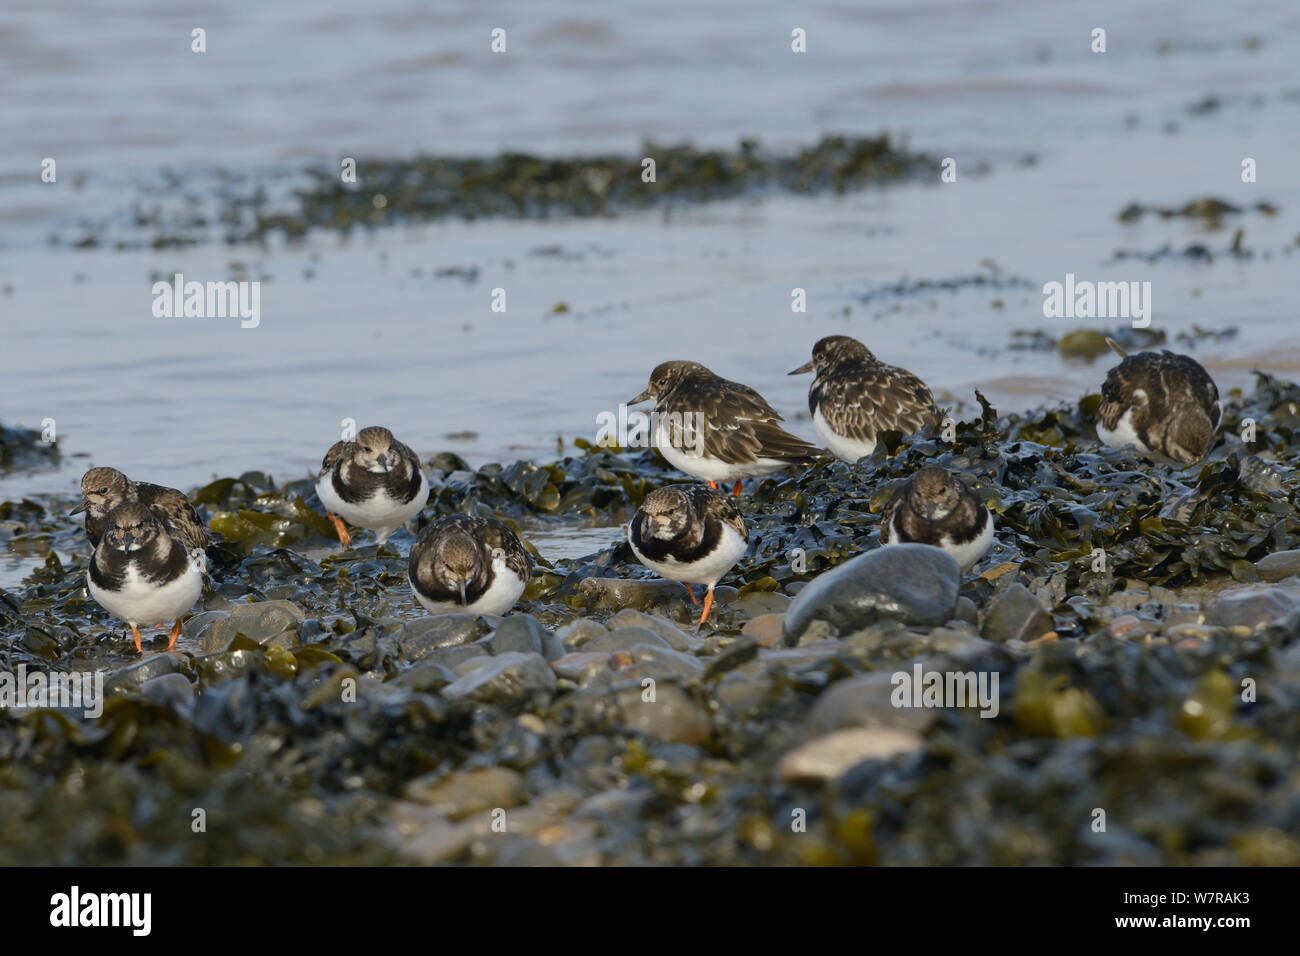 Turnstones (Arenaria interpres) foraging among pebbles and Bladder wrack (Fucus vesiculosus) on a falling tide, Severn estuary, Somerset, UK, March. Stock Photo